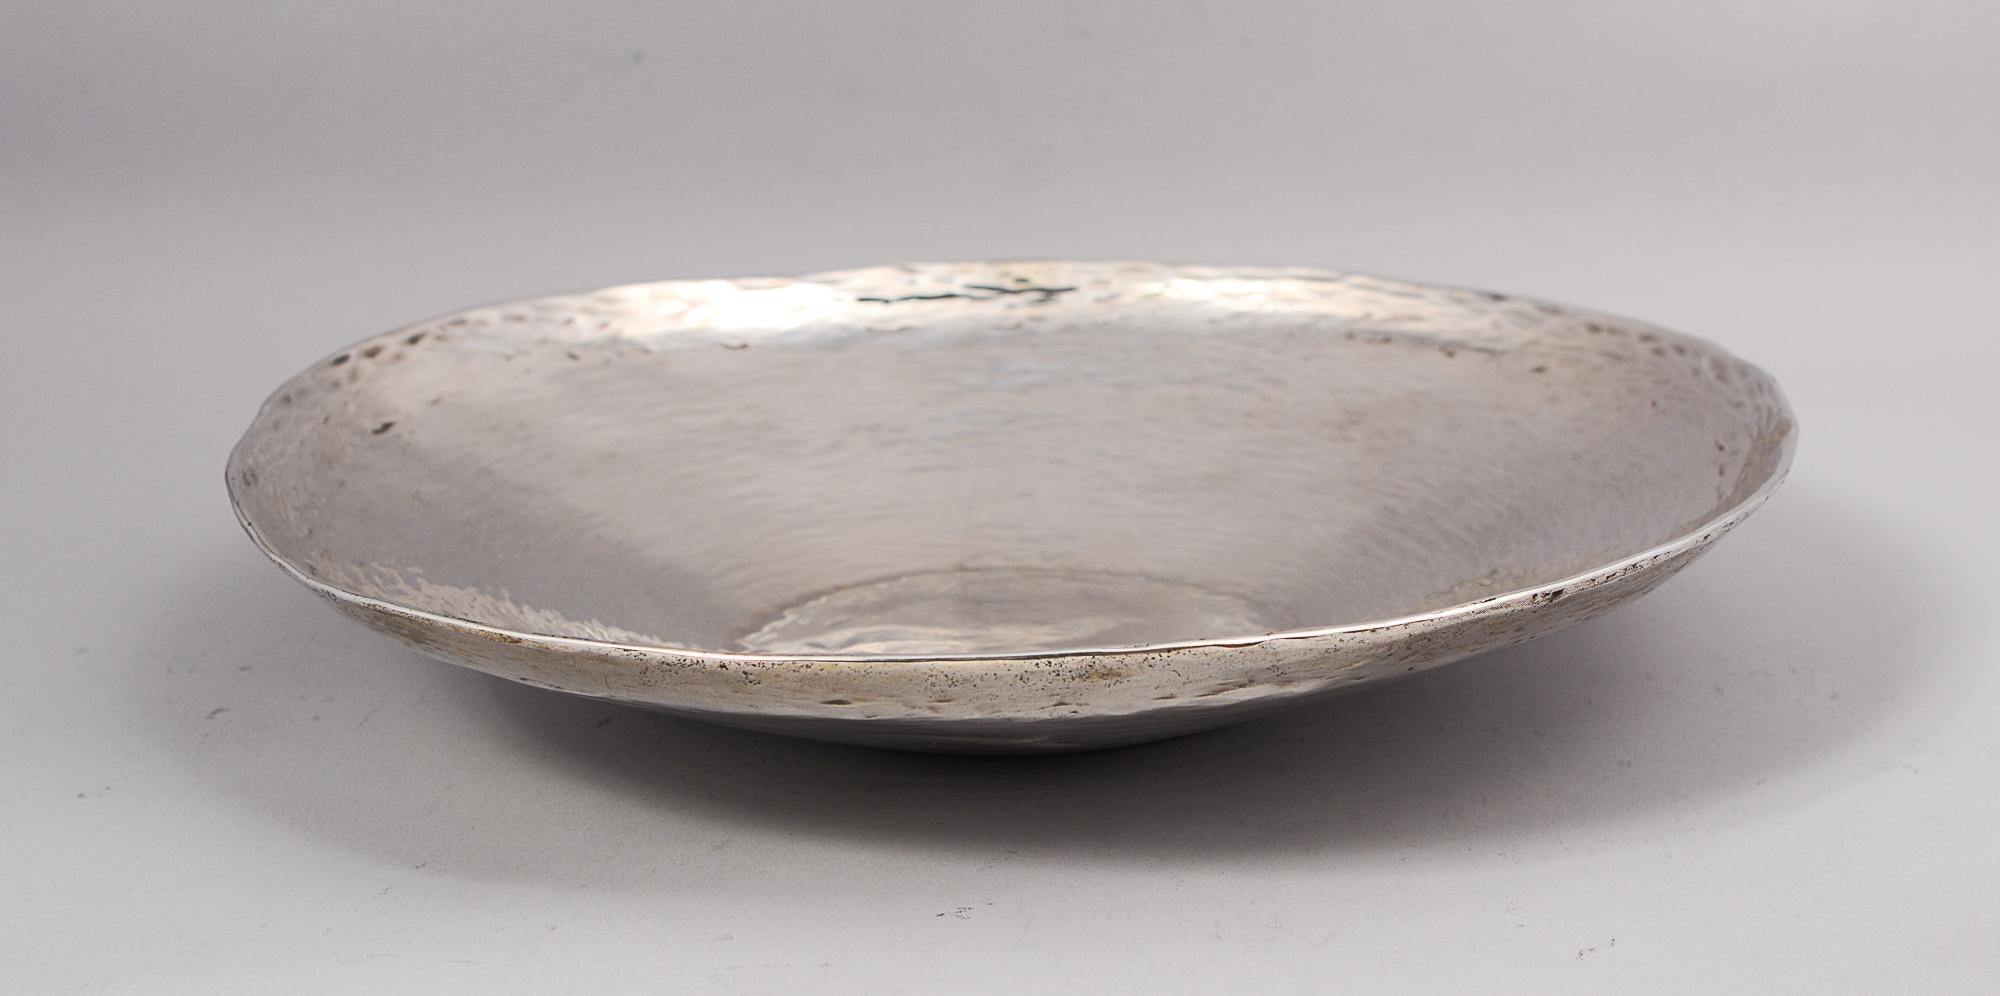 Hand hammered sterling silver bowl by Industria Peruana. The bowl is marked with the makers name J. Tovara. The sides of the bowl have a ripples in water feel. The rim is uneven giving it even more of a handmade look. There is one long scratch on